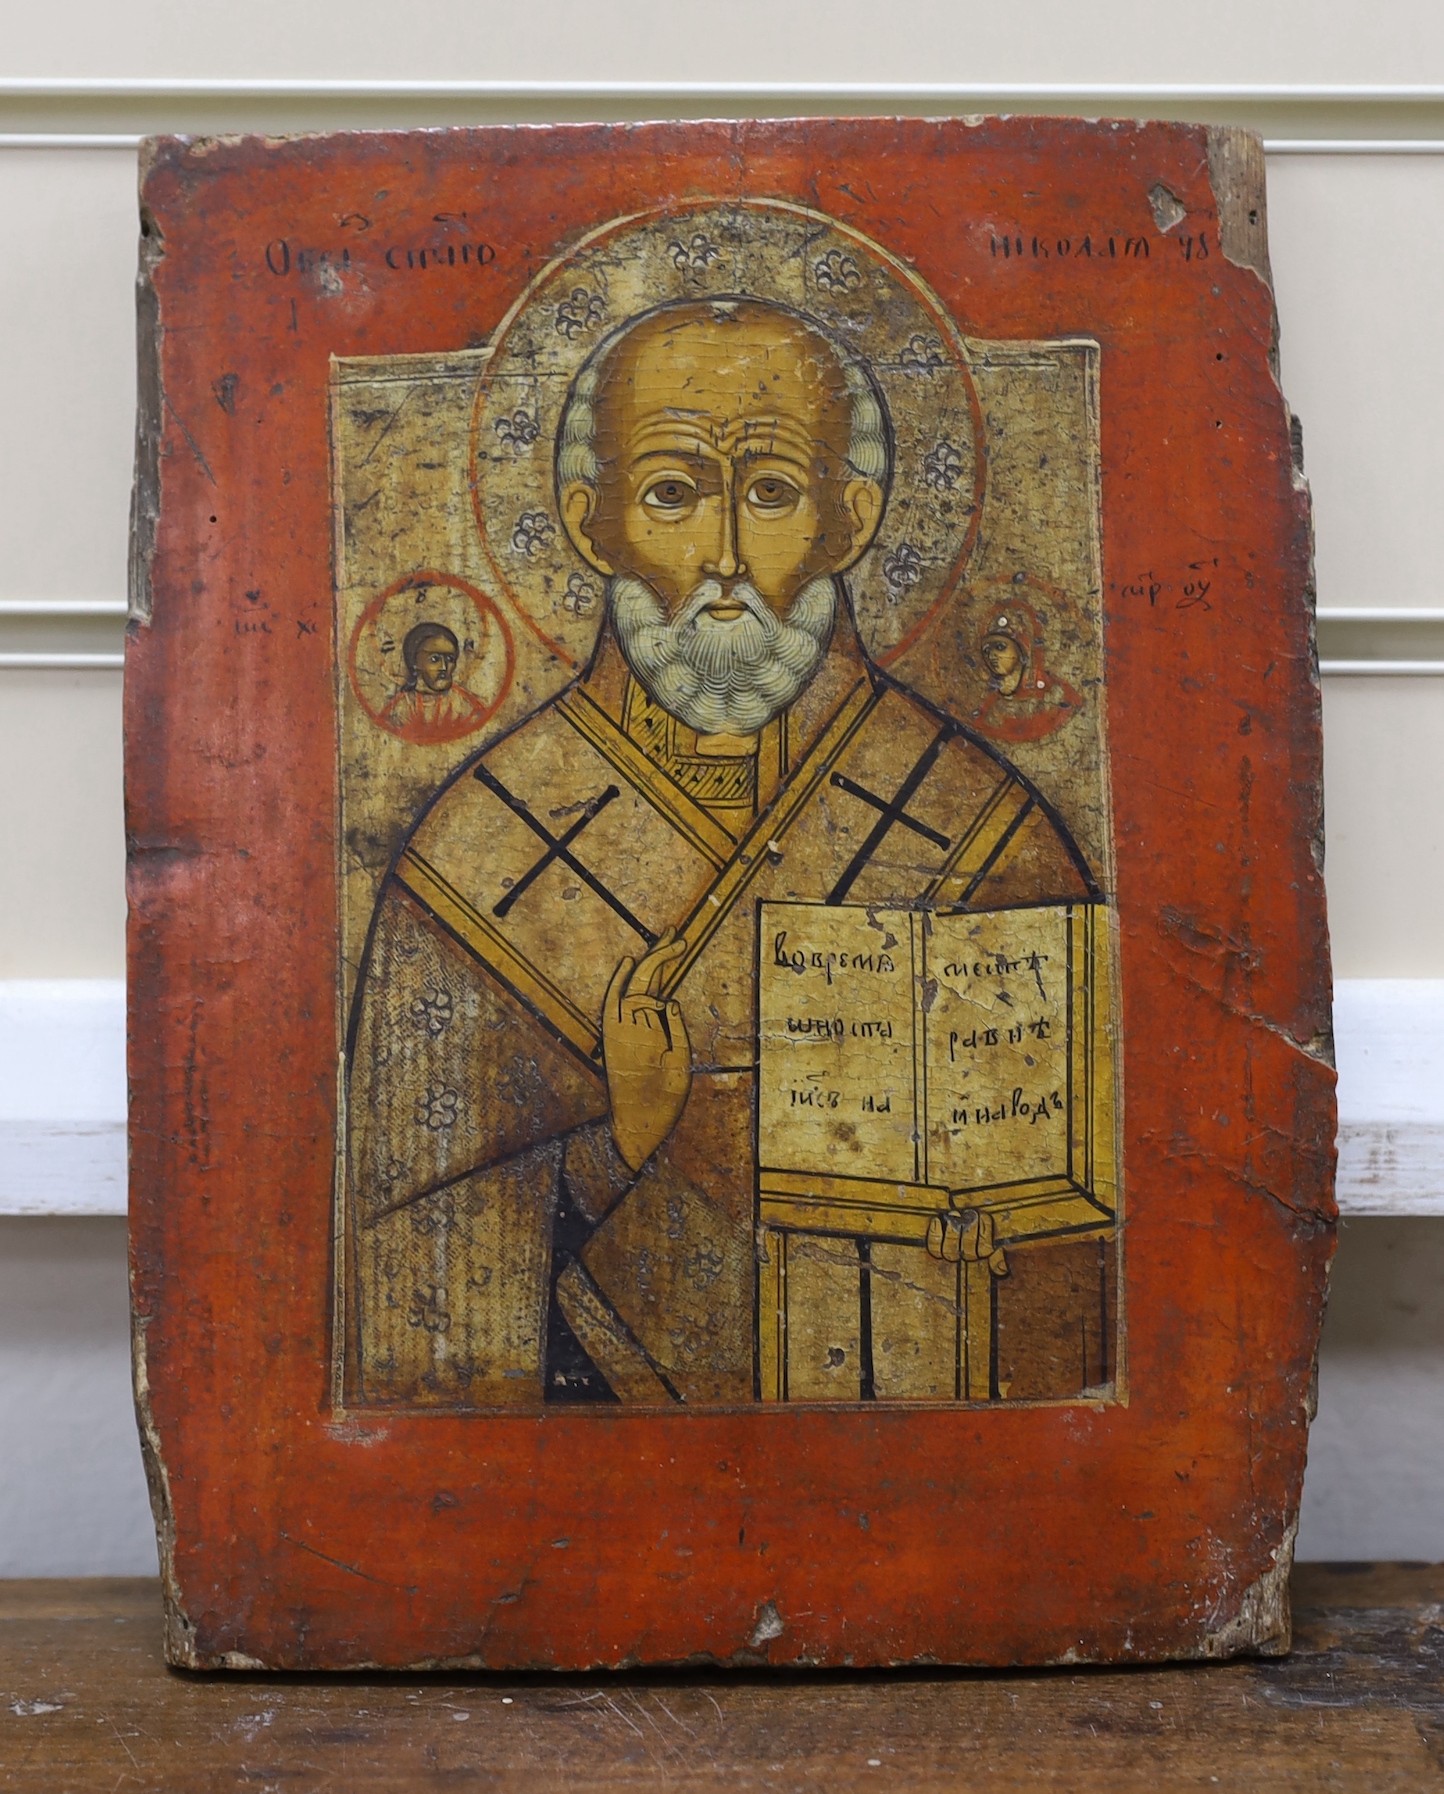 19th century South Russian School, tempera on wooden panel, Icon of St. Nicholas holding the scripture and giving a benediction, 28 x 22cm, unframed